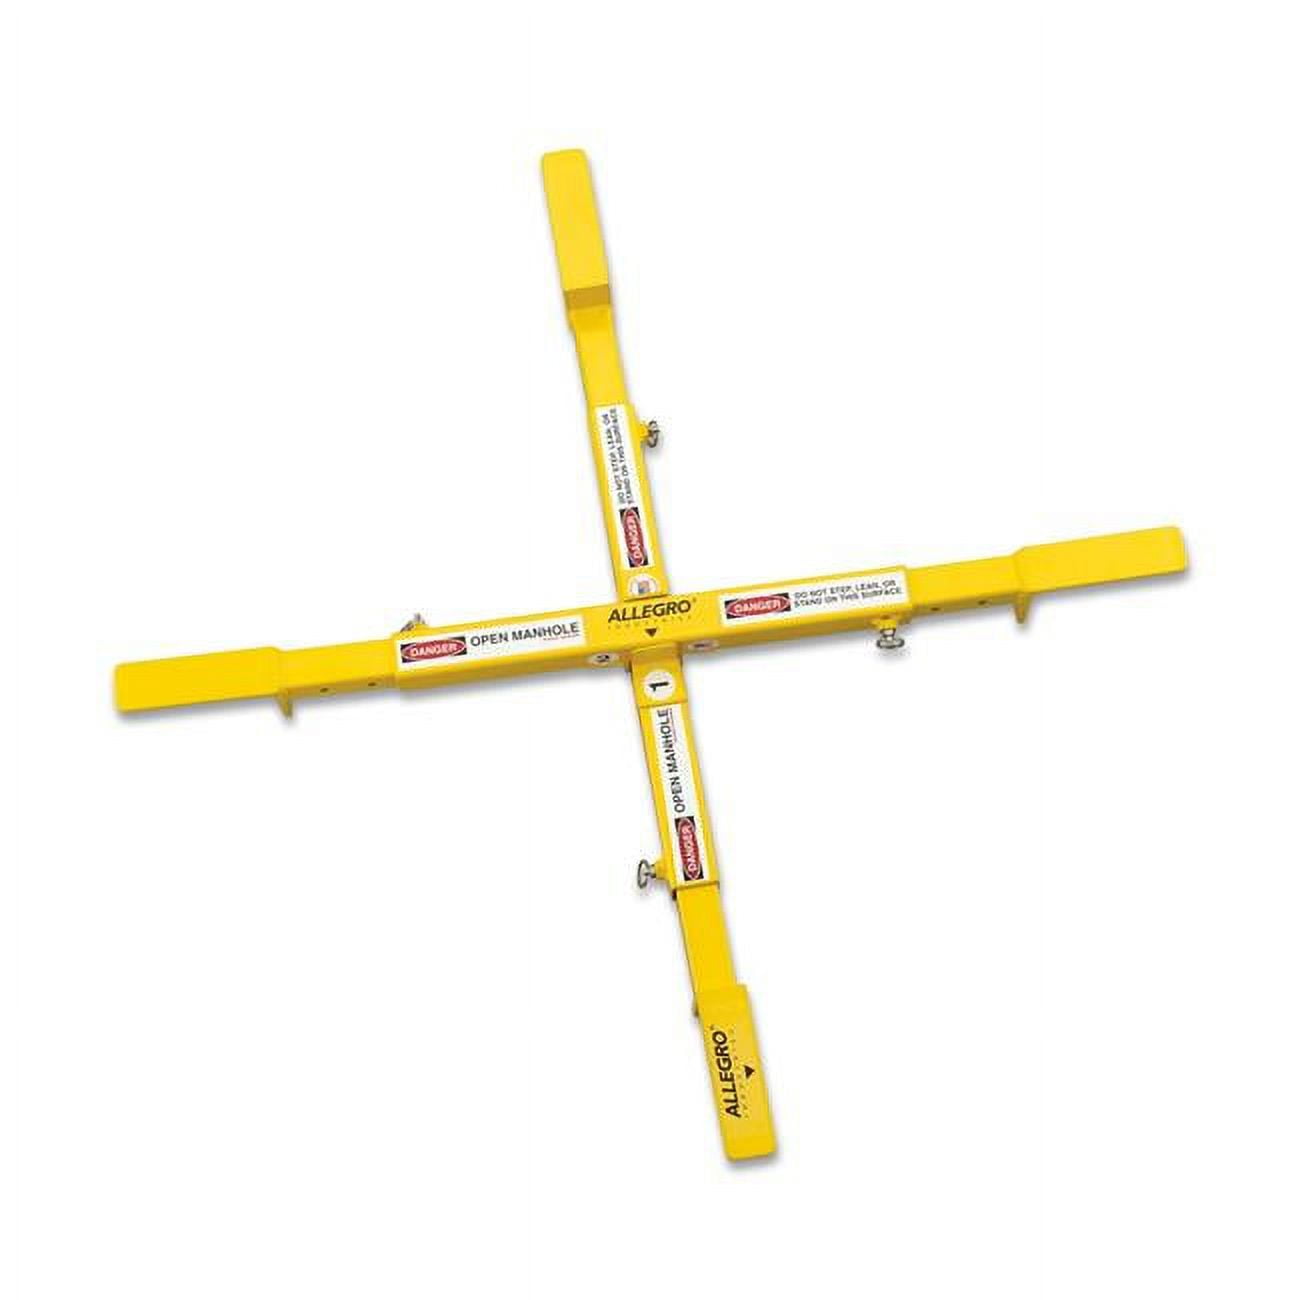 9406-36a 26 X 30 X 36 In. Adjustable Large Manhole Safety Cross